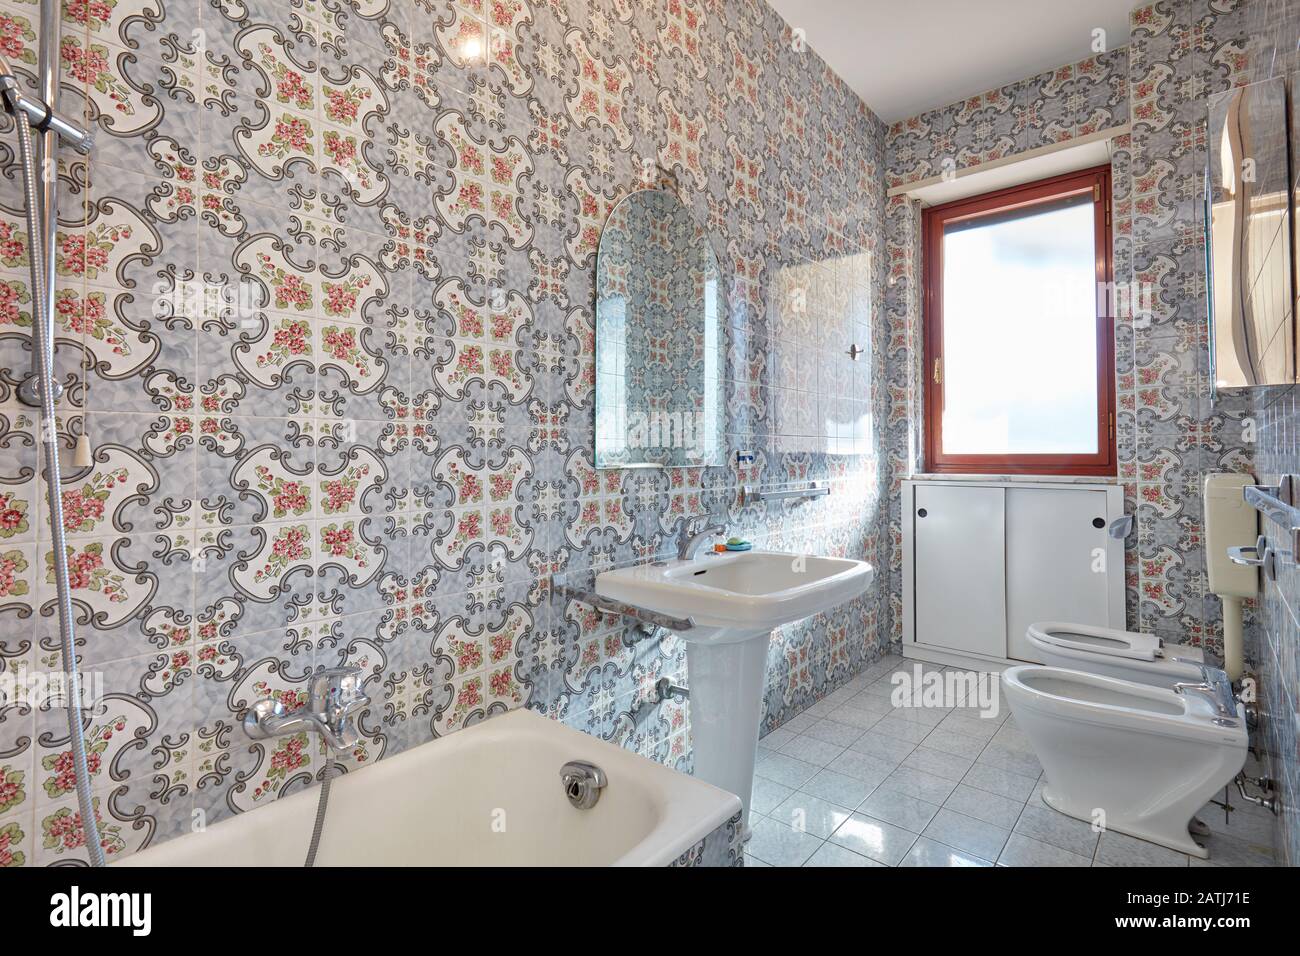 Bathroom interior with floral tiles, sunlight Stock Photo